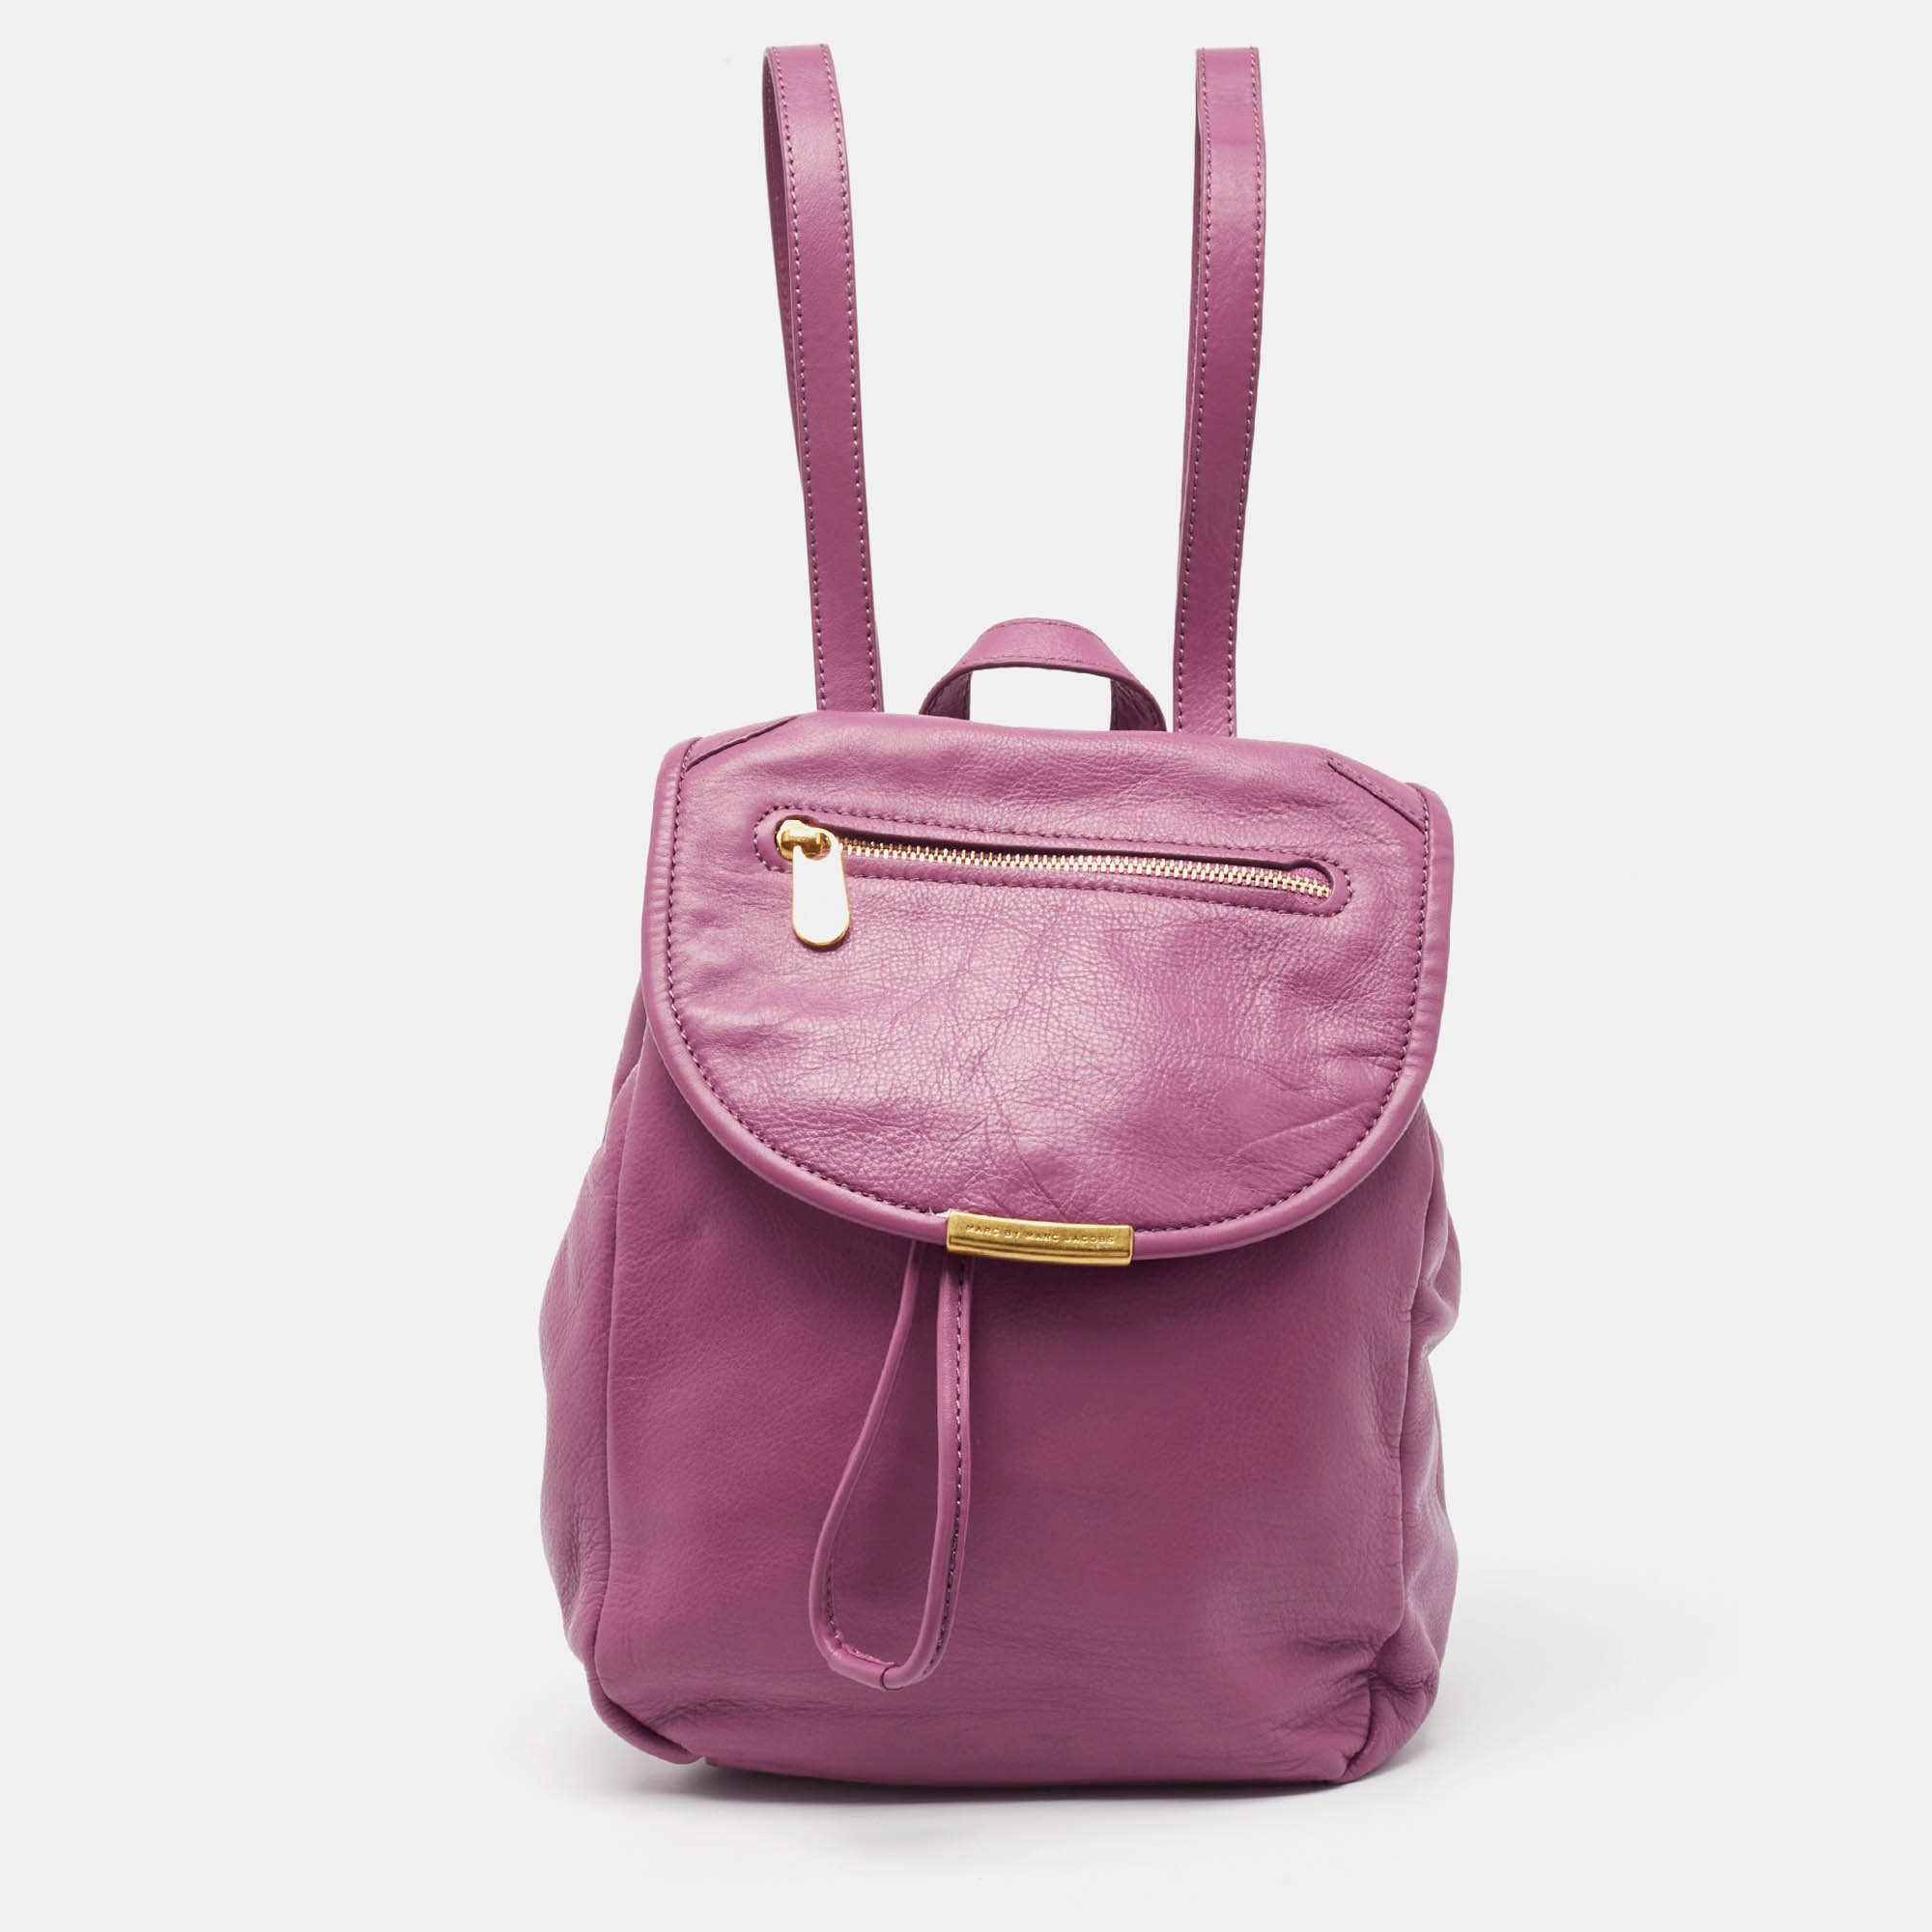 Marc by marc jacobs purple leather backpack